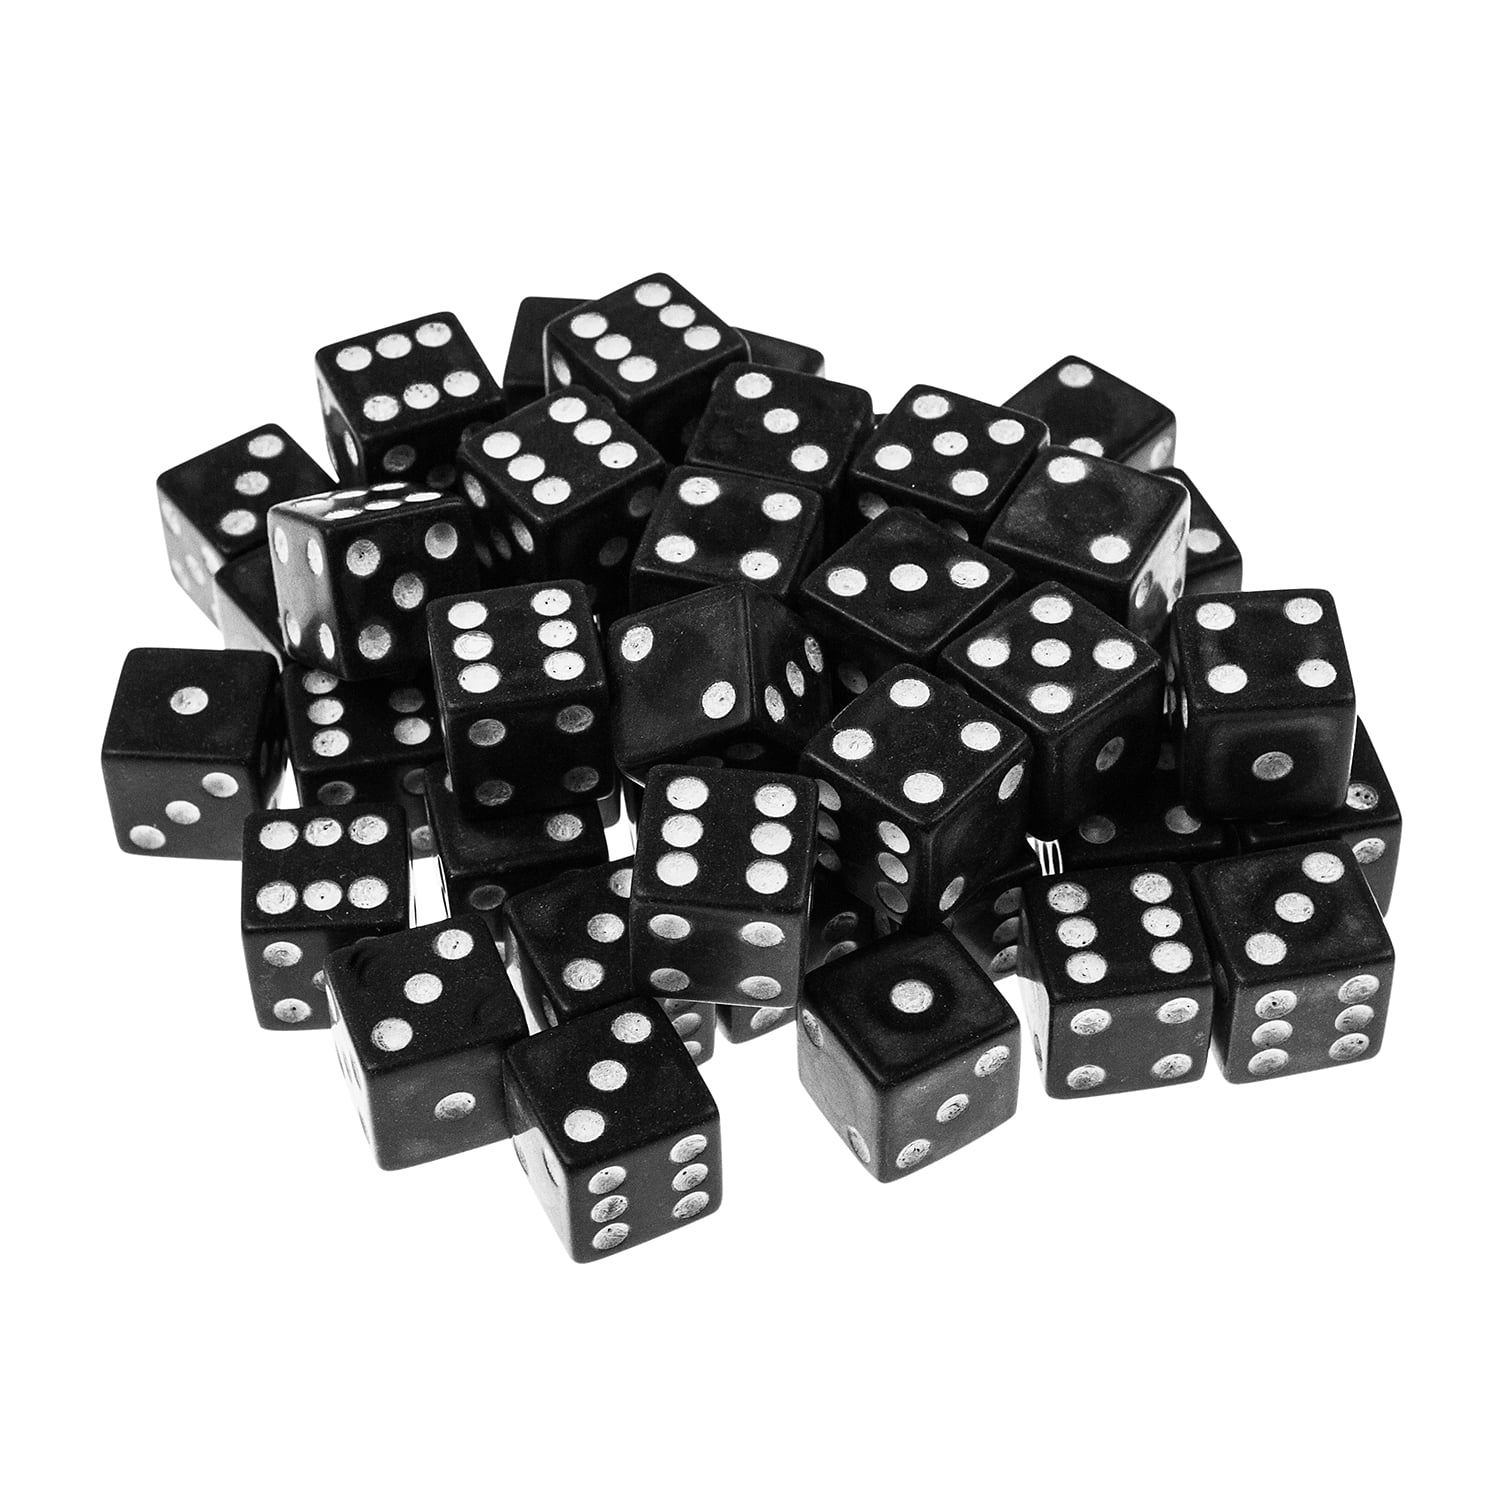 Game Dice Playing Rolling Casino White Standard 16mm Plastic Party Favor Gift 